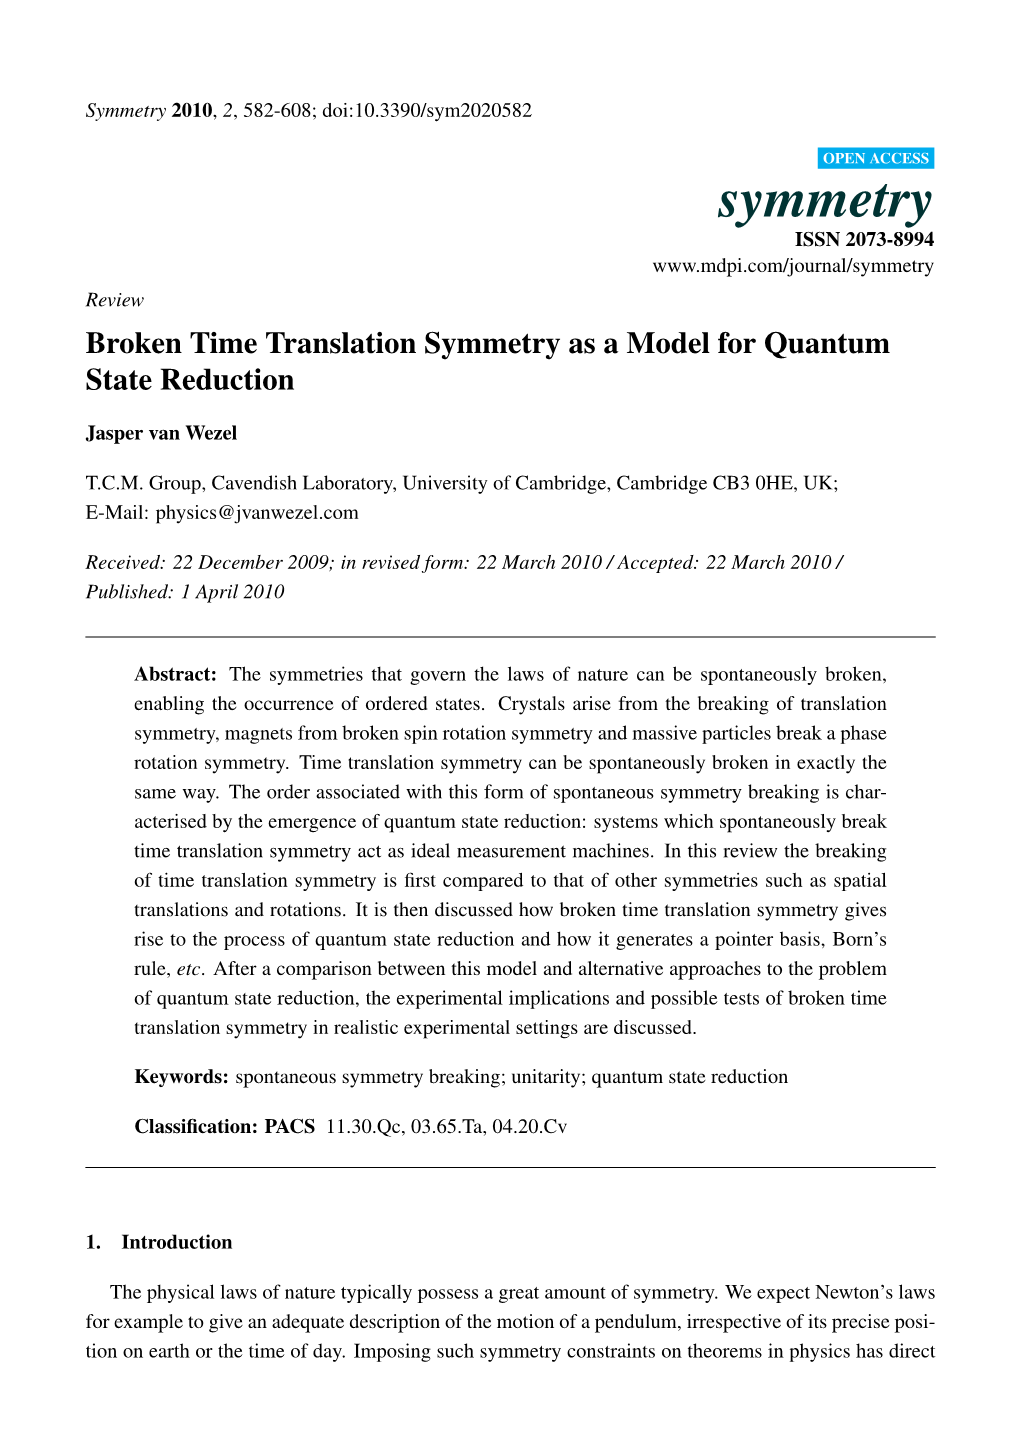 Broken Time Translation Symmetry As a Model for Quantum State Reduction